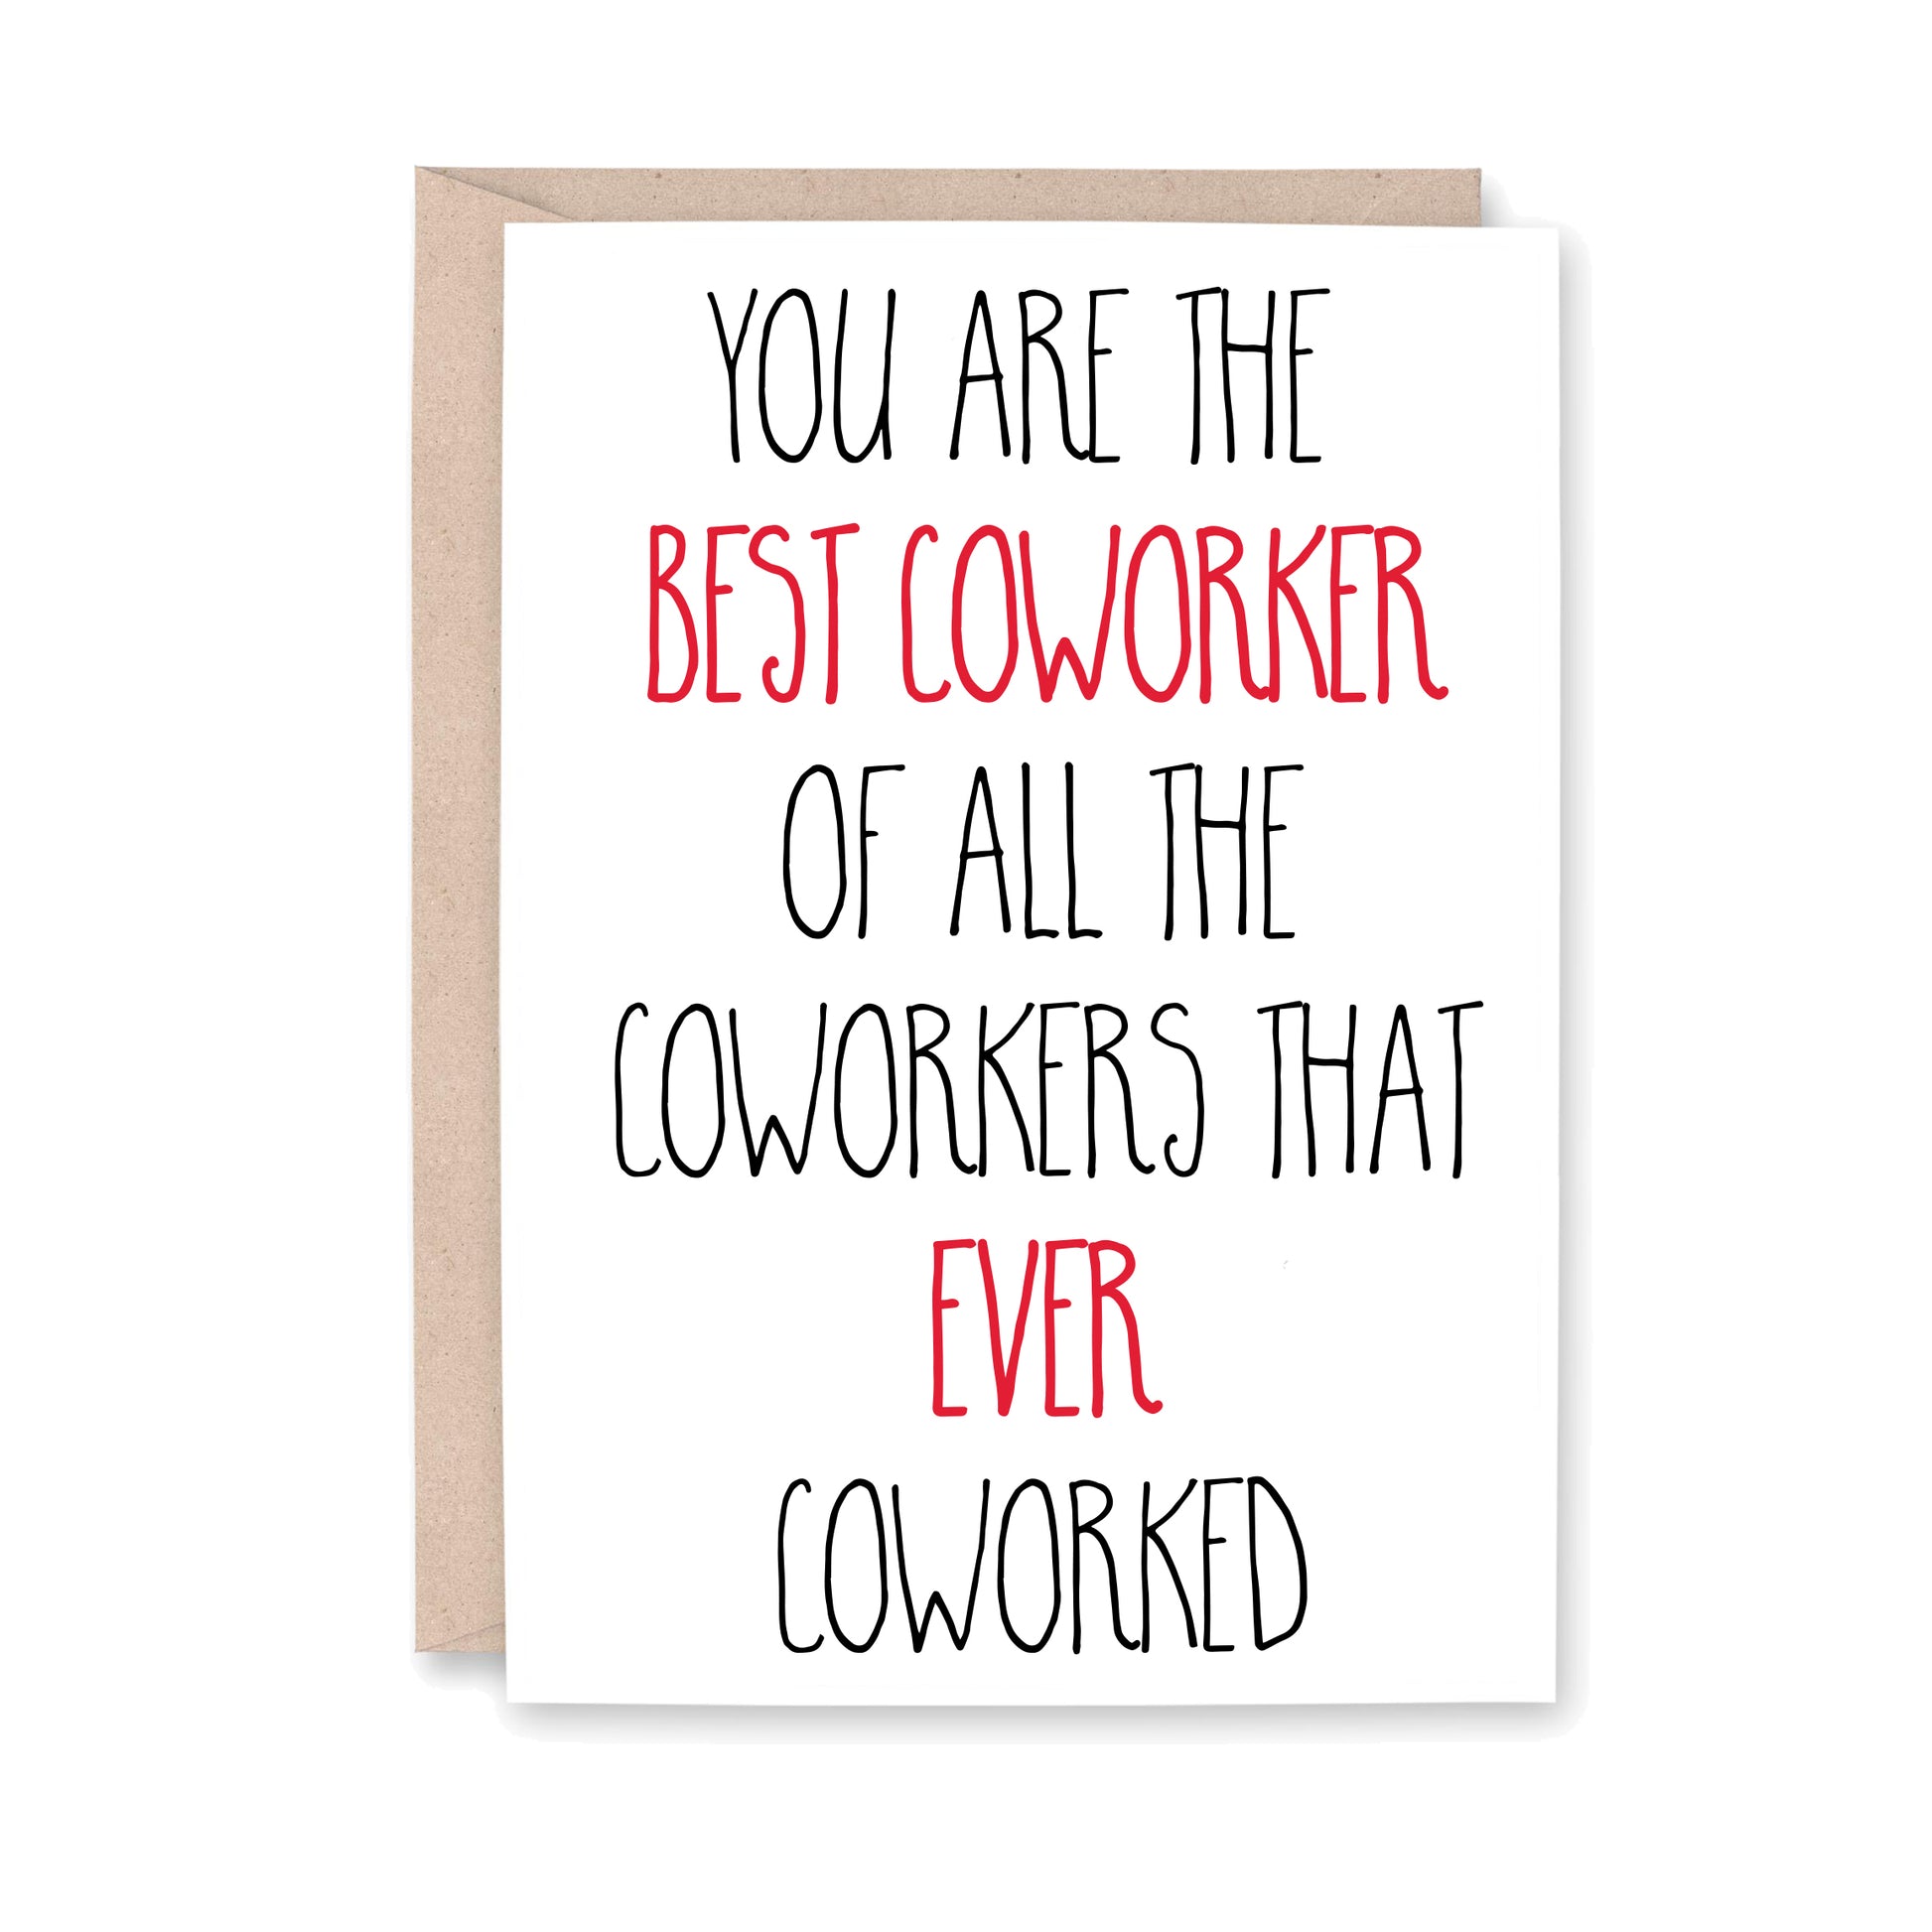 You are the best CoWorker of all the coworkers that ever coworked